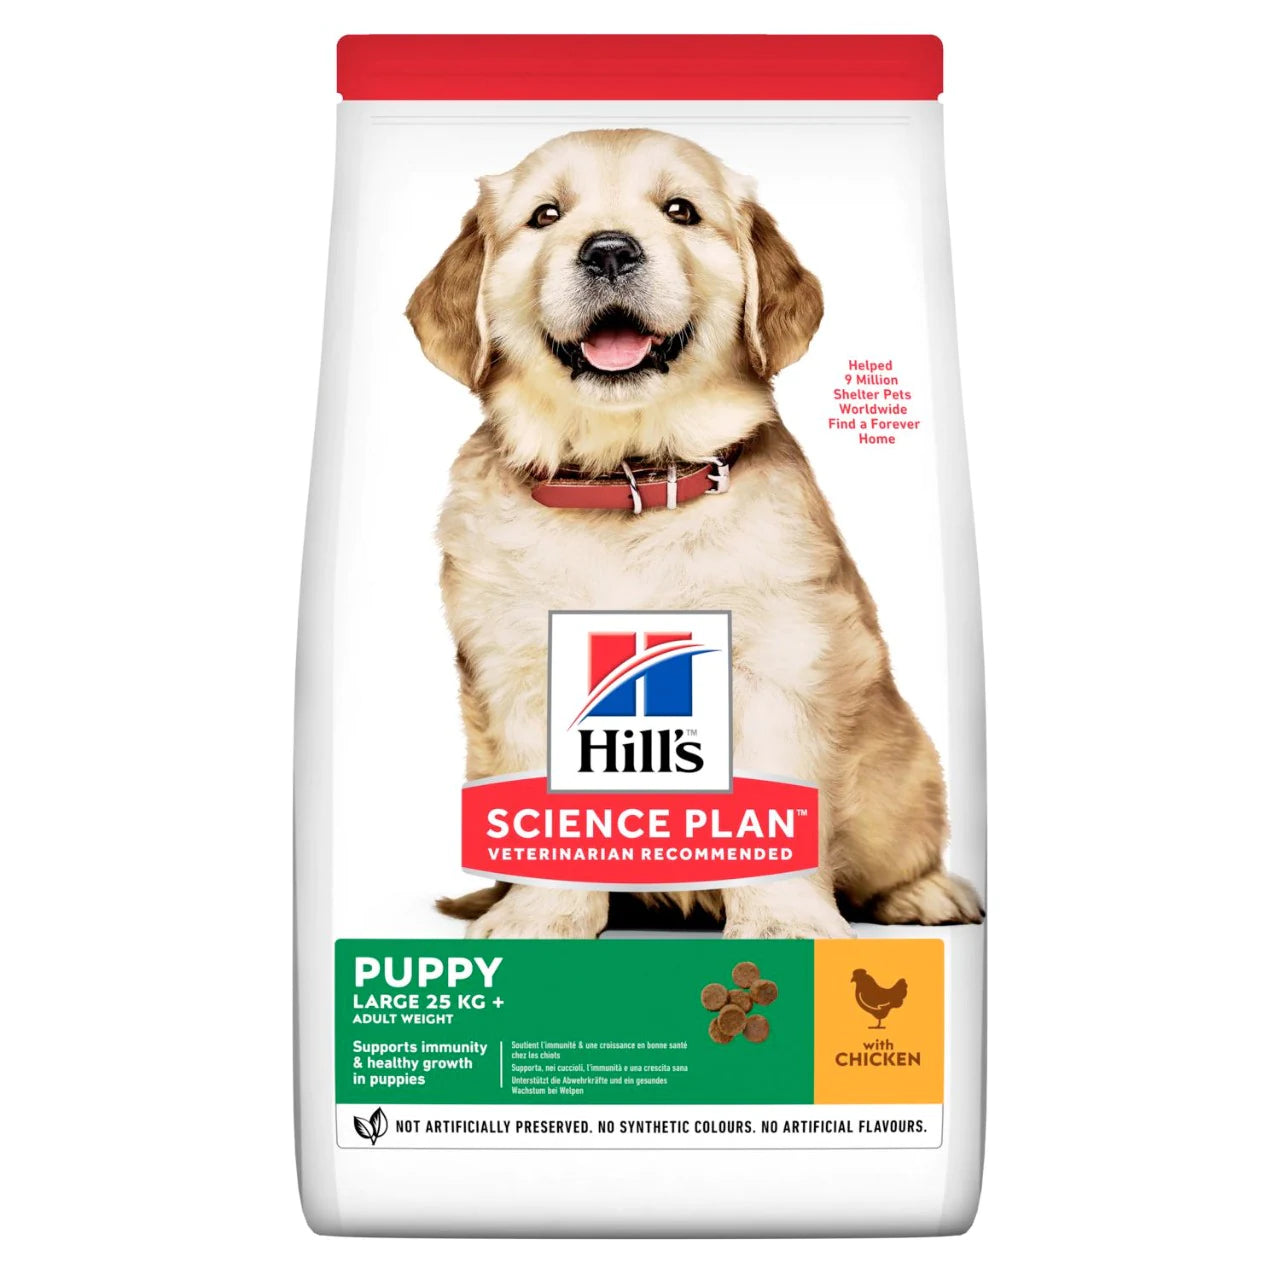 Hill's Puppy Large Breed Chicken 2.5kg